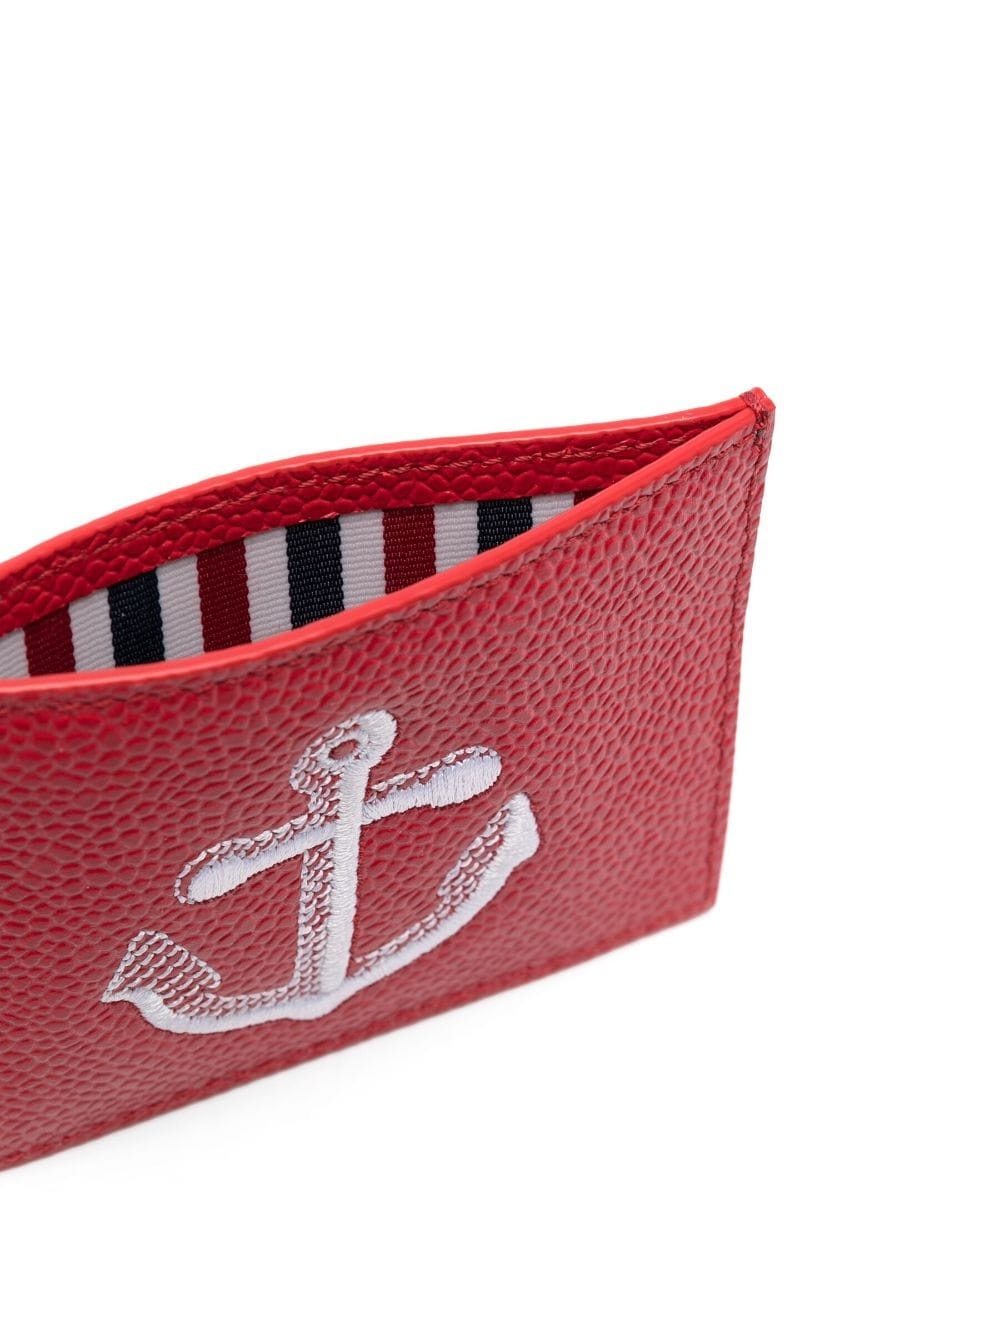 anchor-embroidered leather cardholder - 3